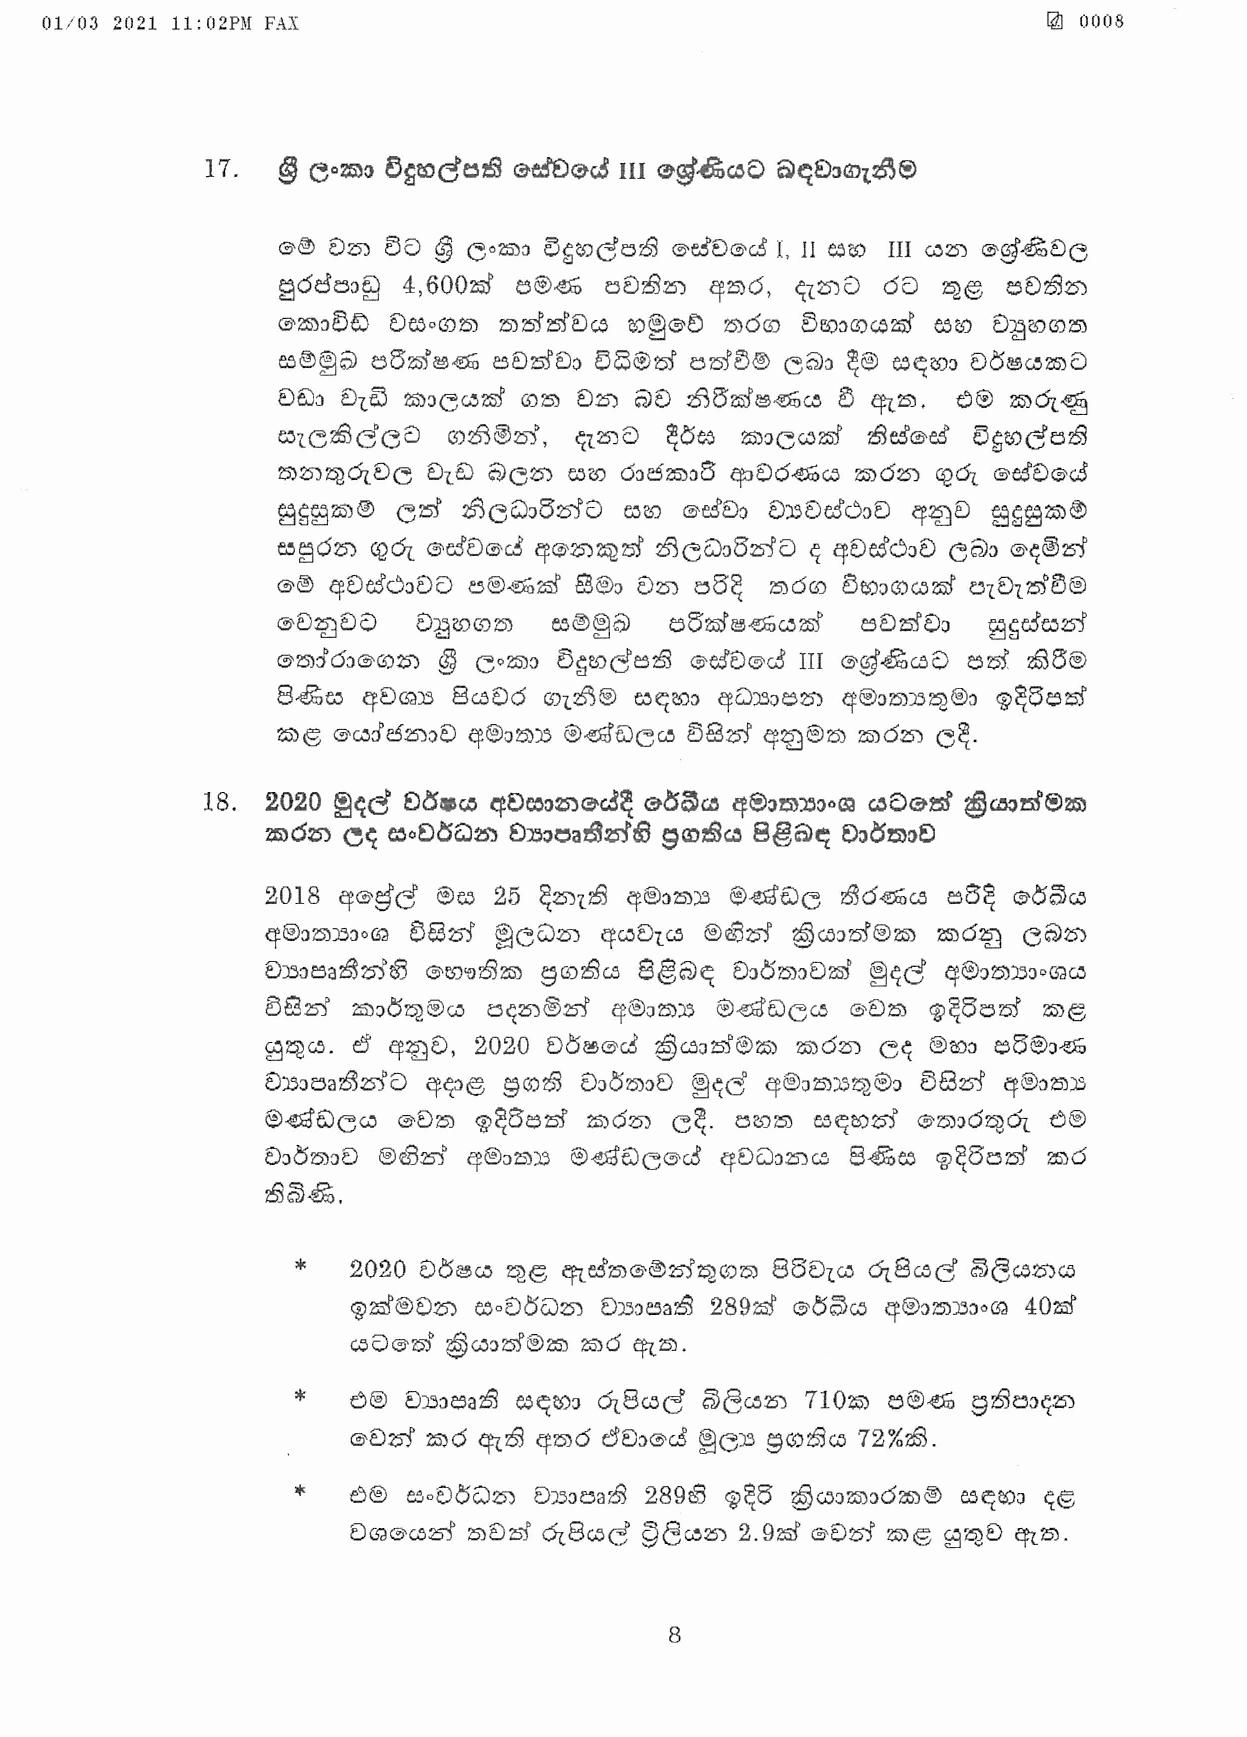 Cabinet Decision on 01.03.2021 page 008